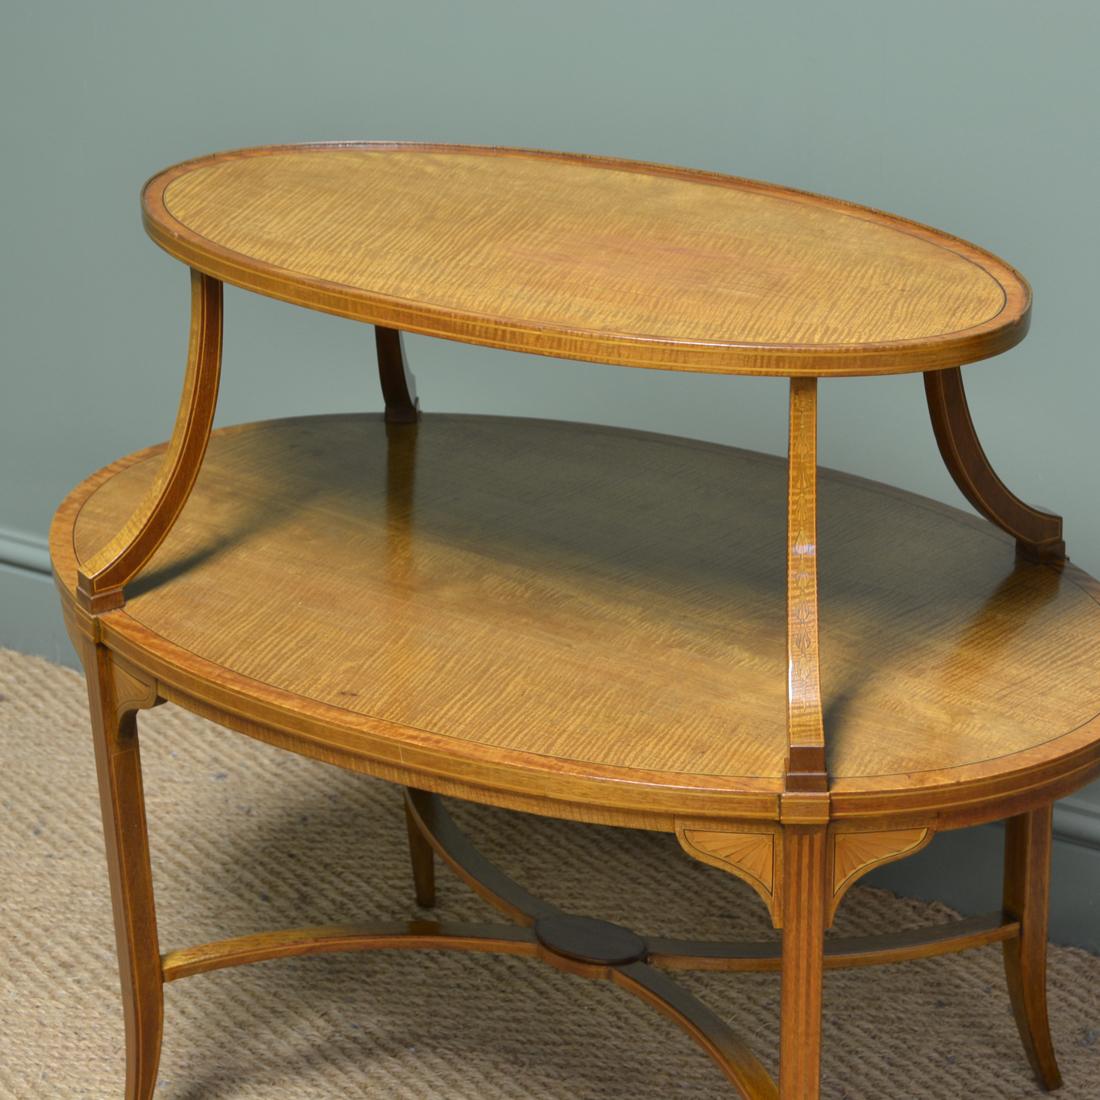 Superb quality Edwards & Roberts satinwood two tier occasional / lamp table

Constructed by the Renowned Makers Edwards and Roberts, this superb table is eye-catching due to the two oval tiers with crossbanded edges, boxwood and ebony string inlay